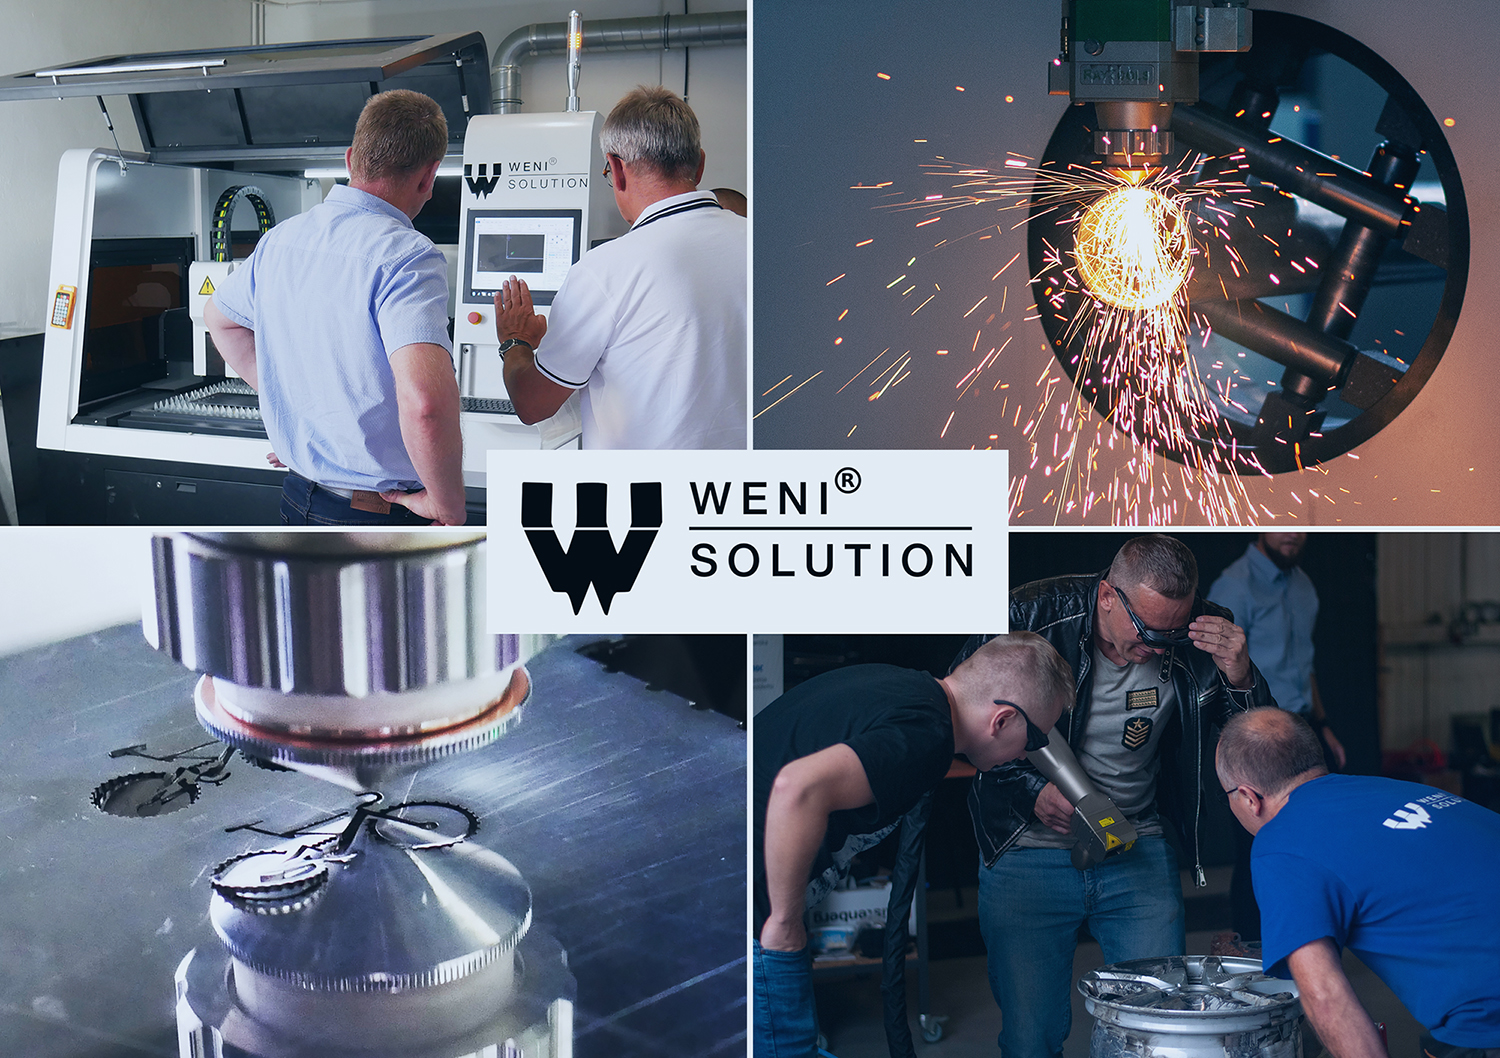 Weni Solutions